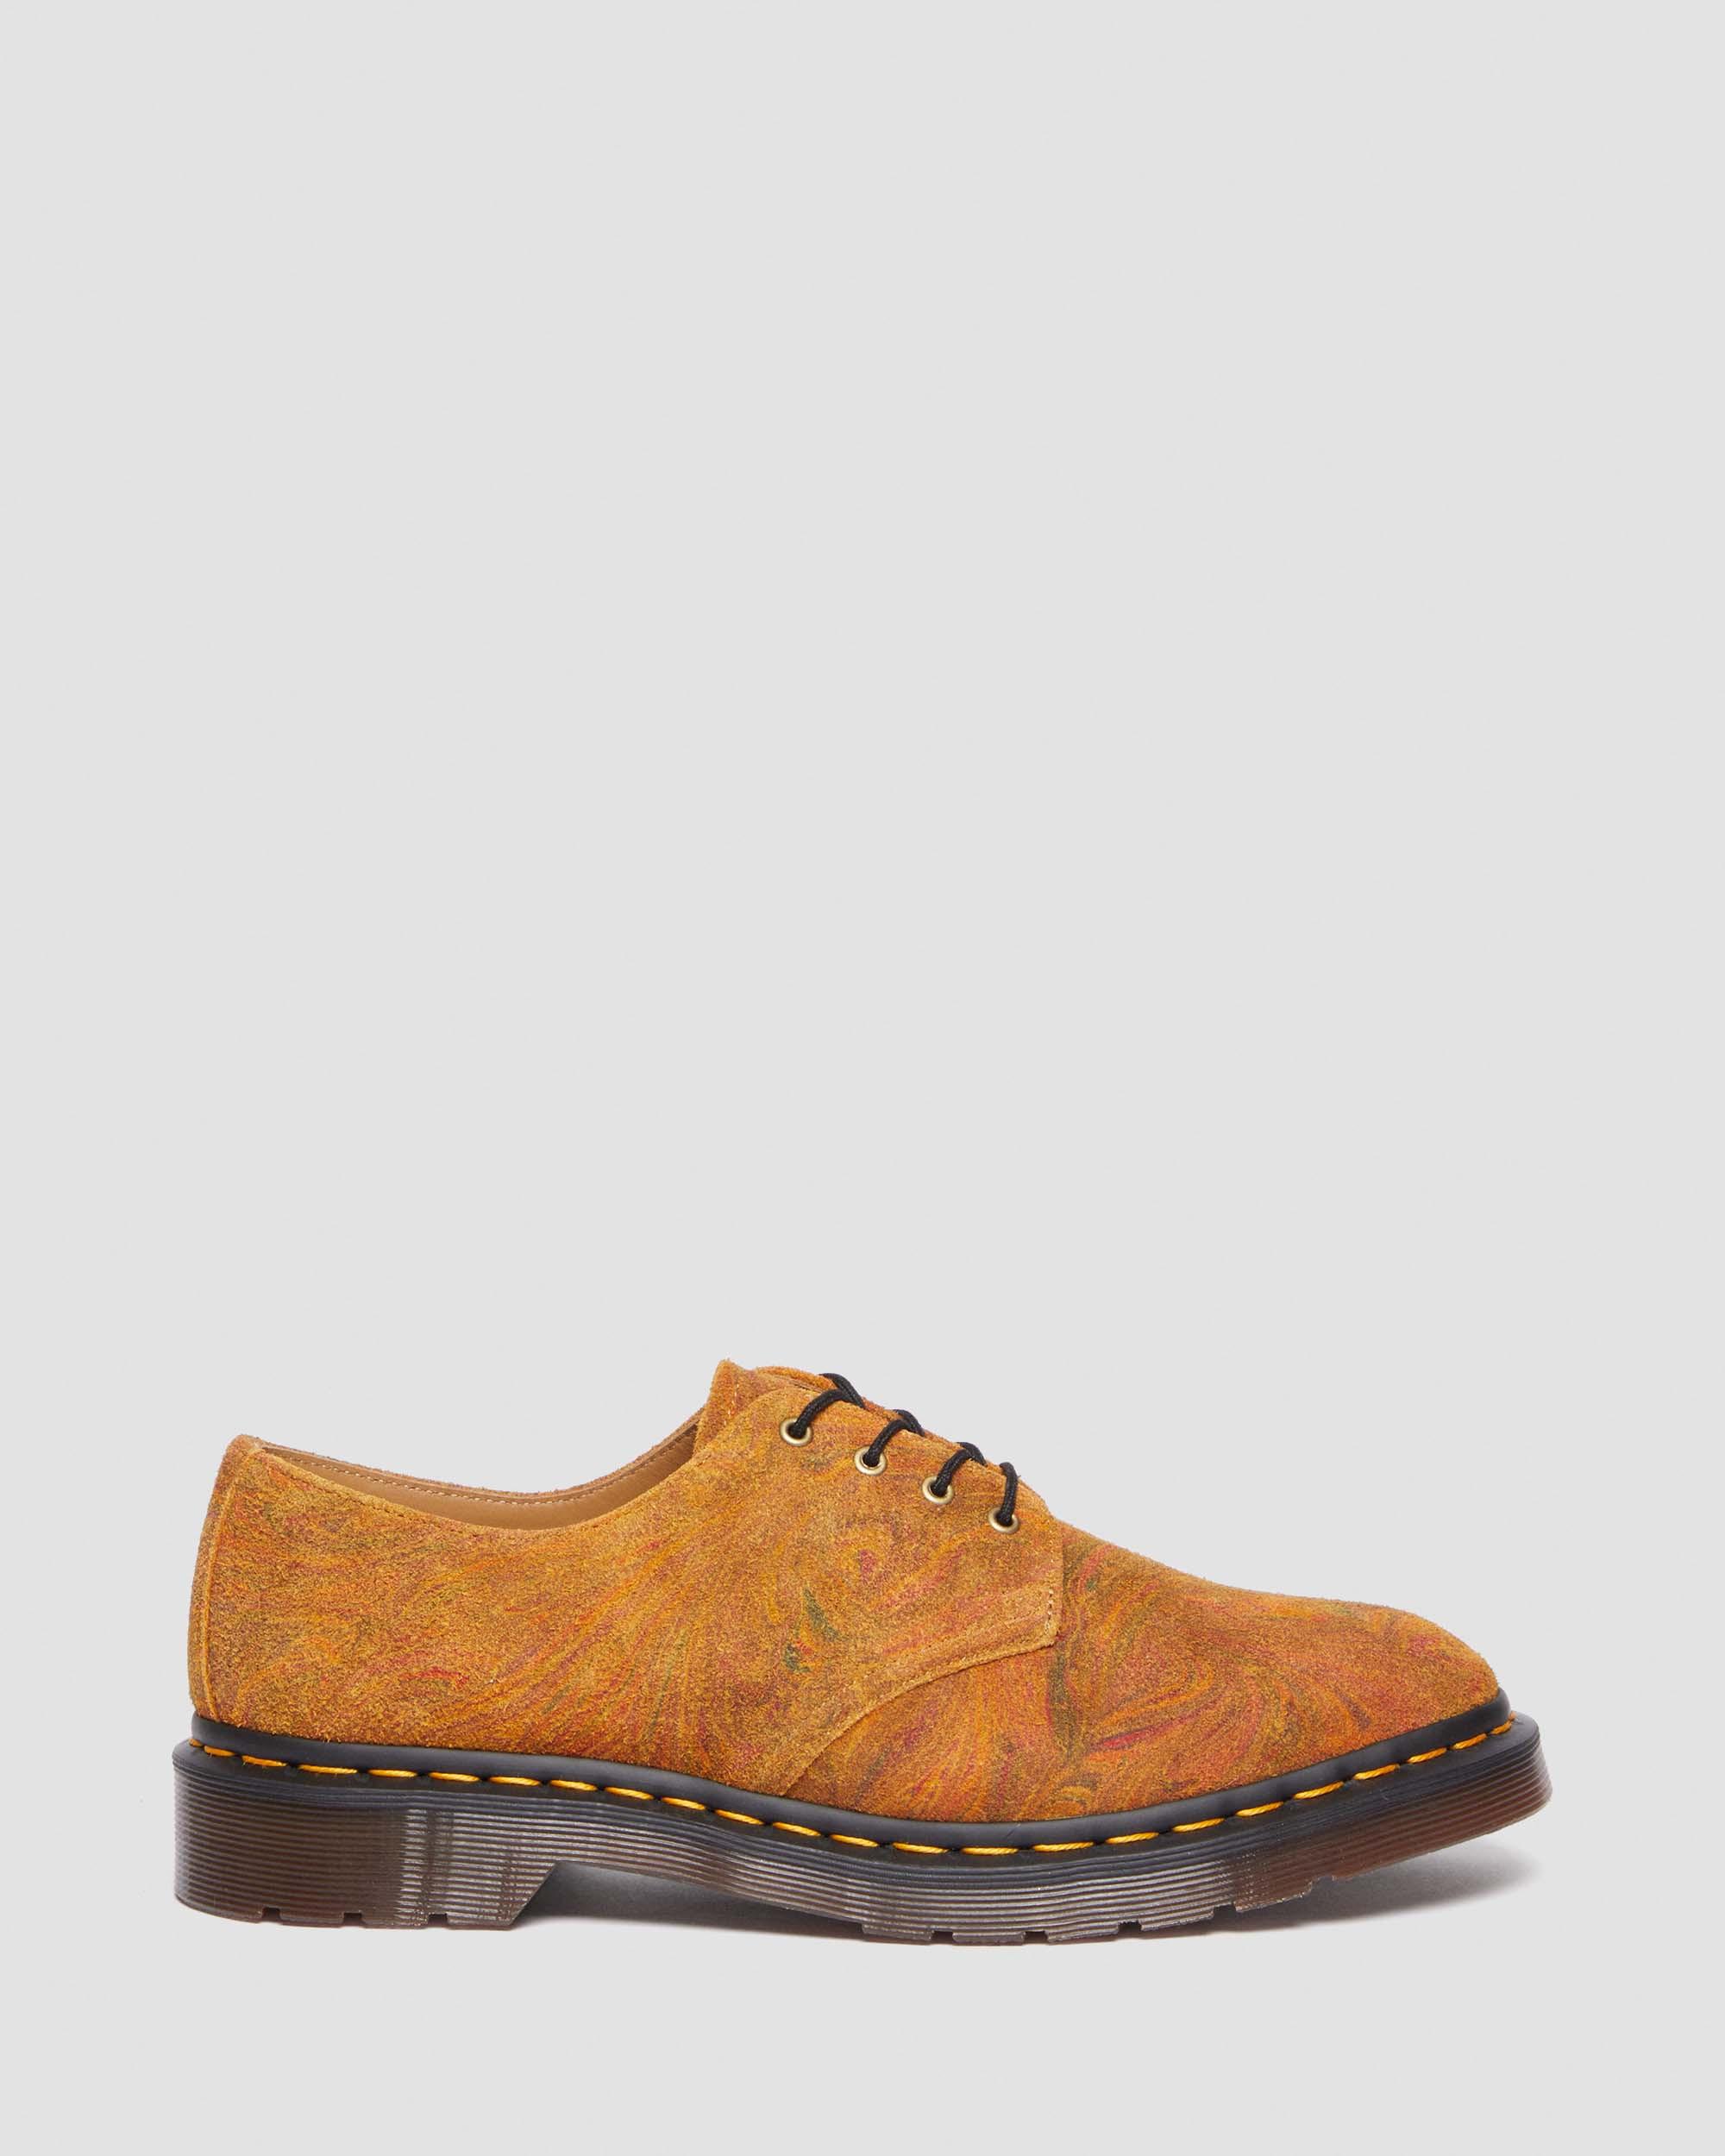 Smiths Marbled Suede Dress Shoes in Brown | Dr. Martens